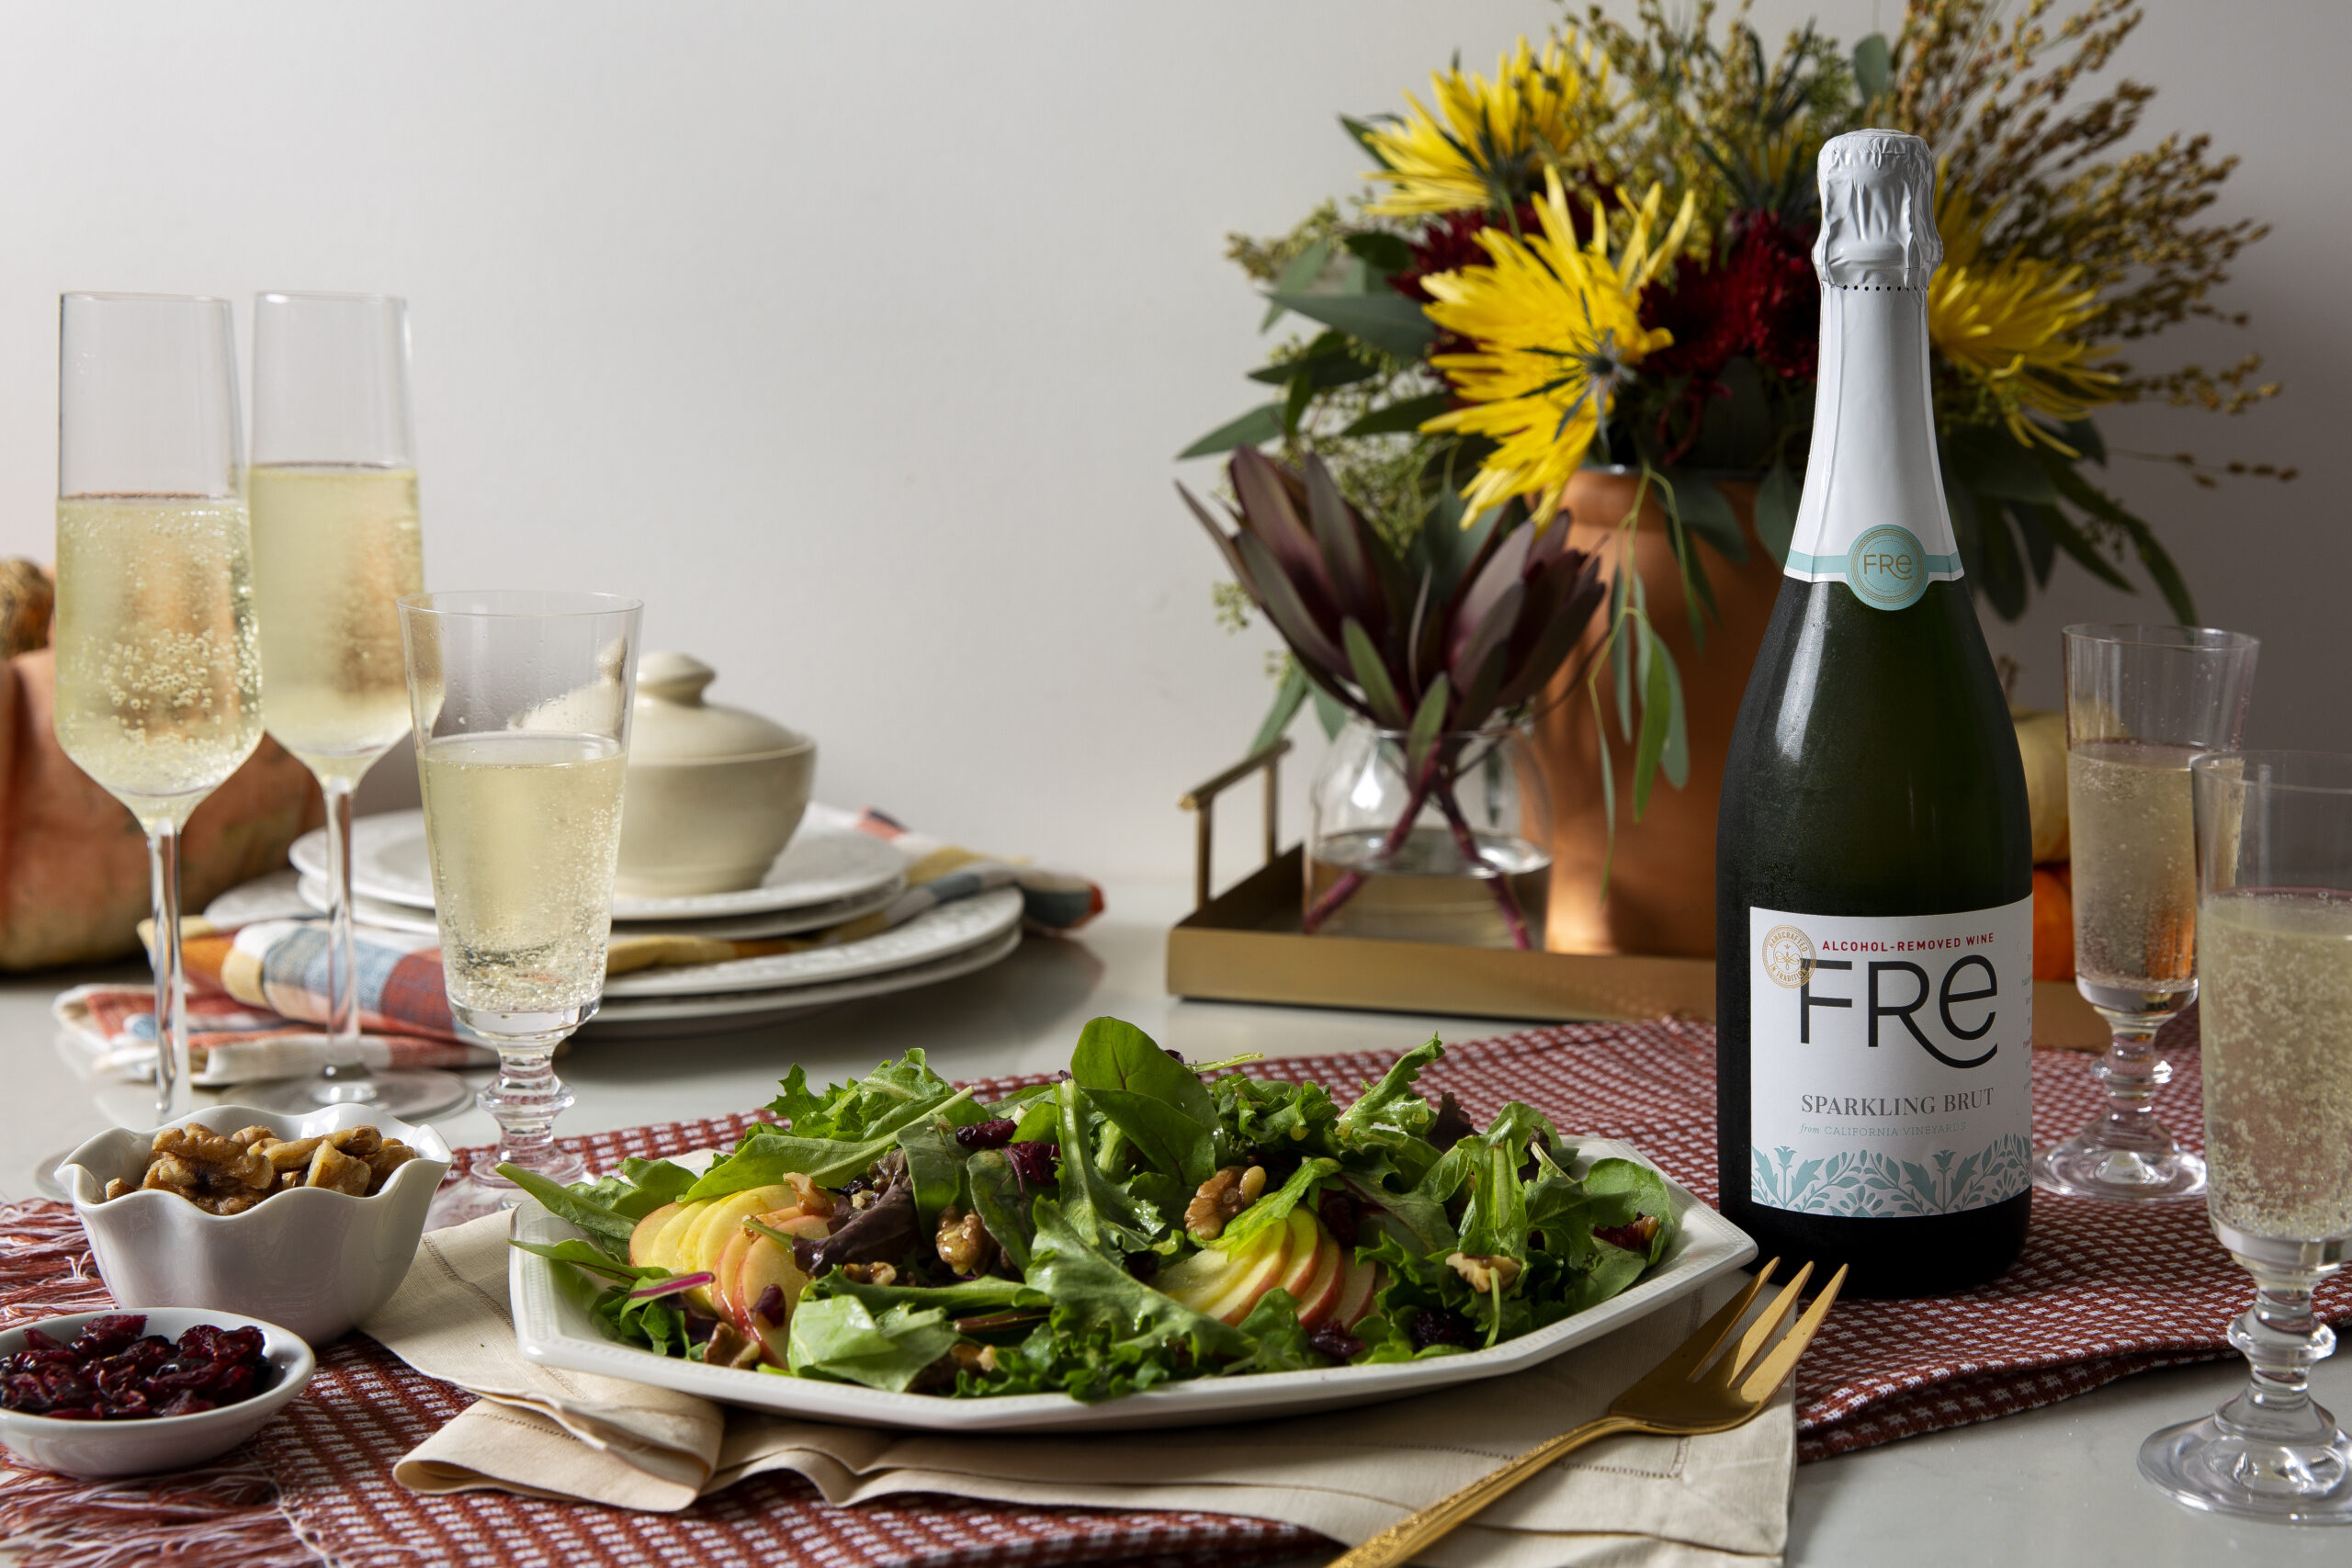 eMeal Recipe Apple Walnut Mixed Greens and FRE Sparkling Brut